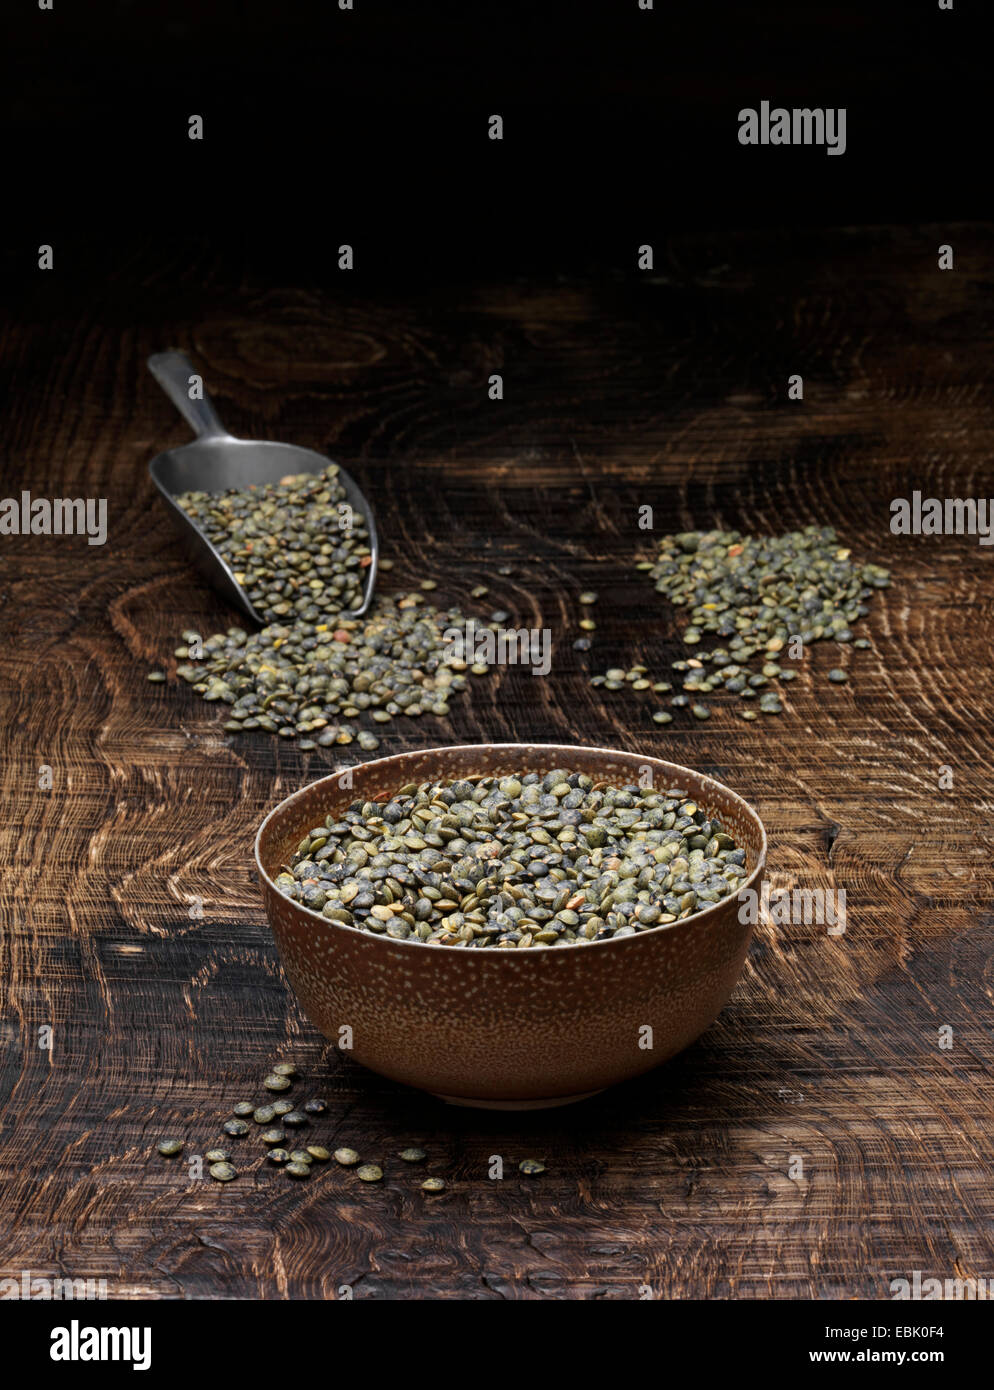 Still life with bowl of puy lentils and scoop Stock Photo